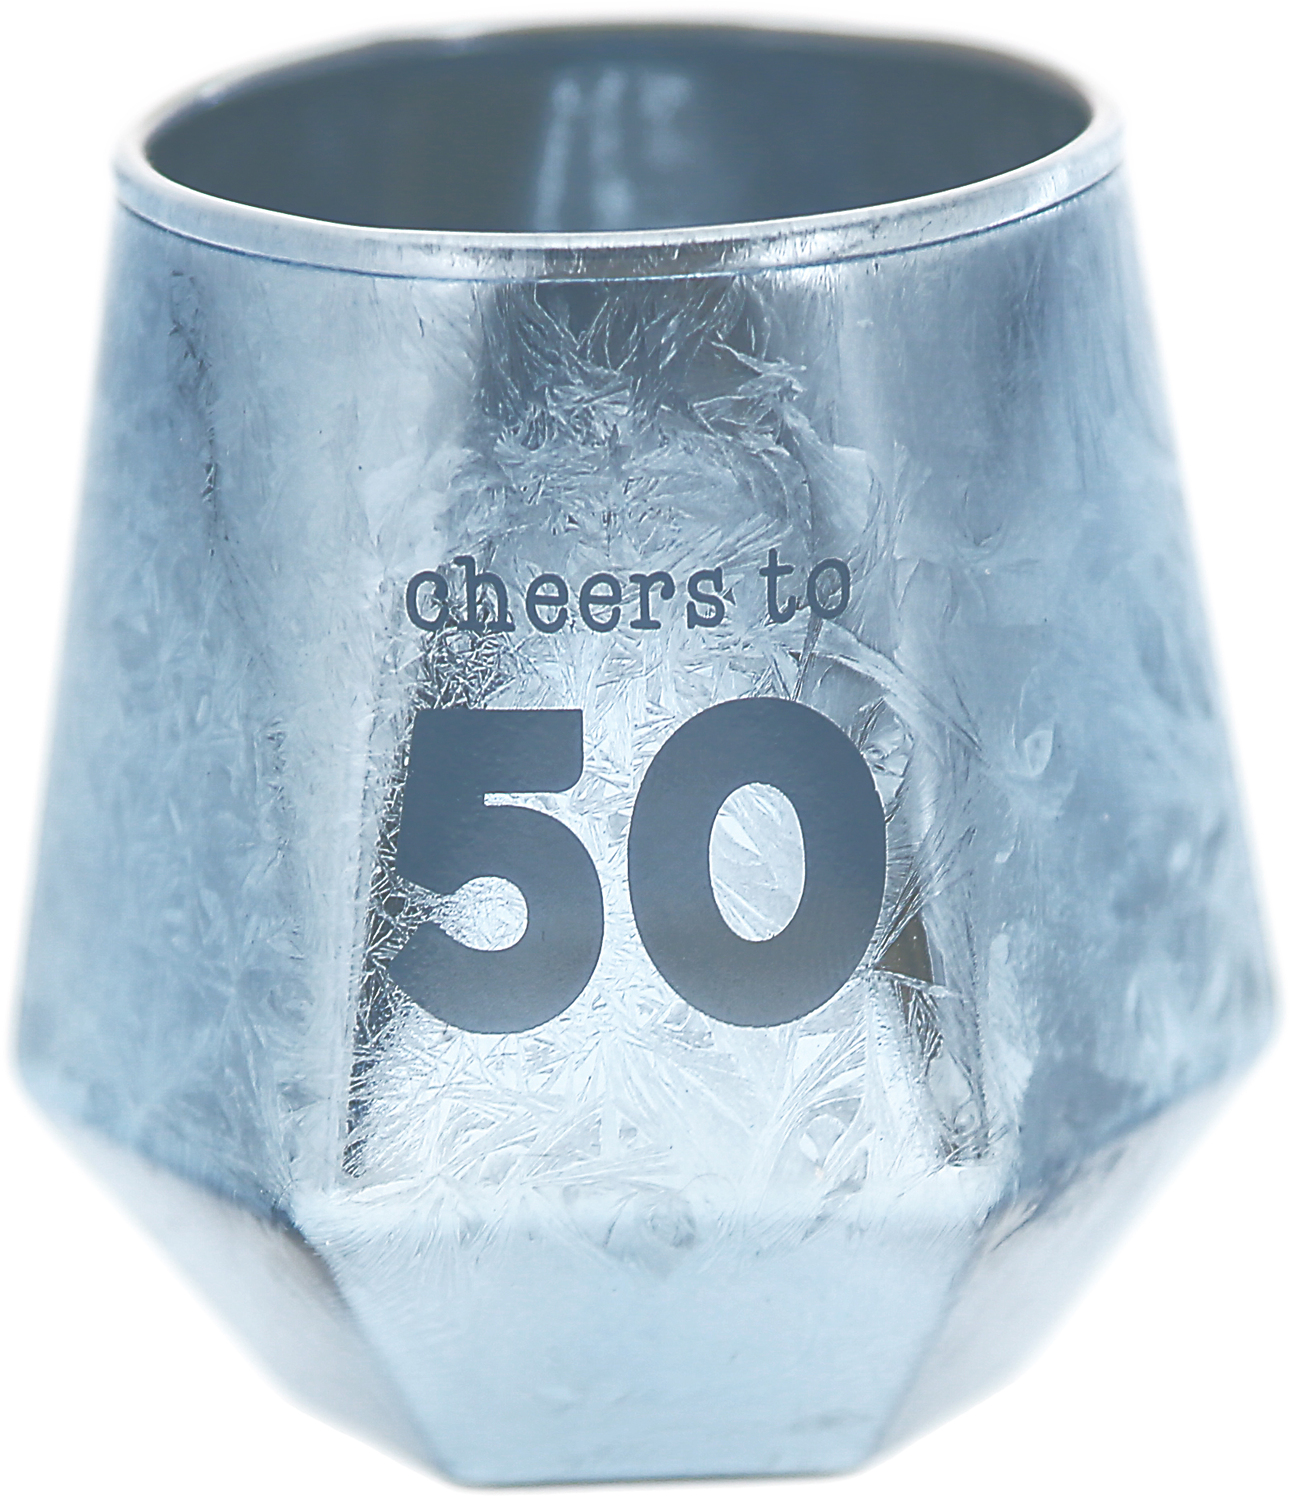 Cheers to 50 by Happy Confetti to You - Cheers to 50 - 3 oz Geometric Shot Glass